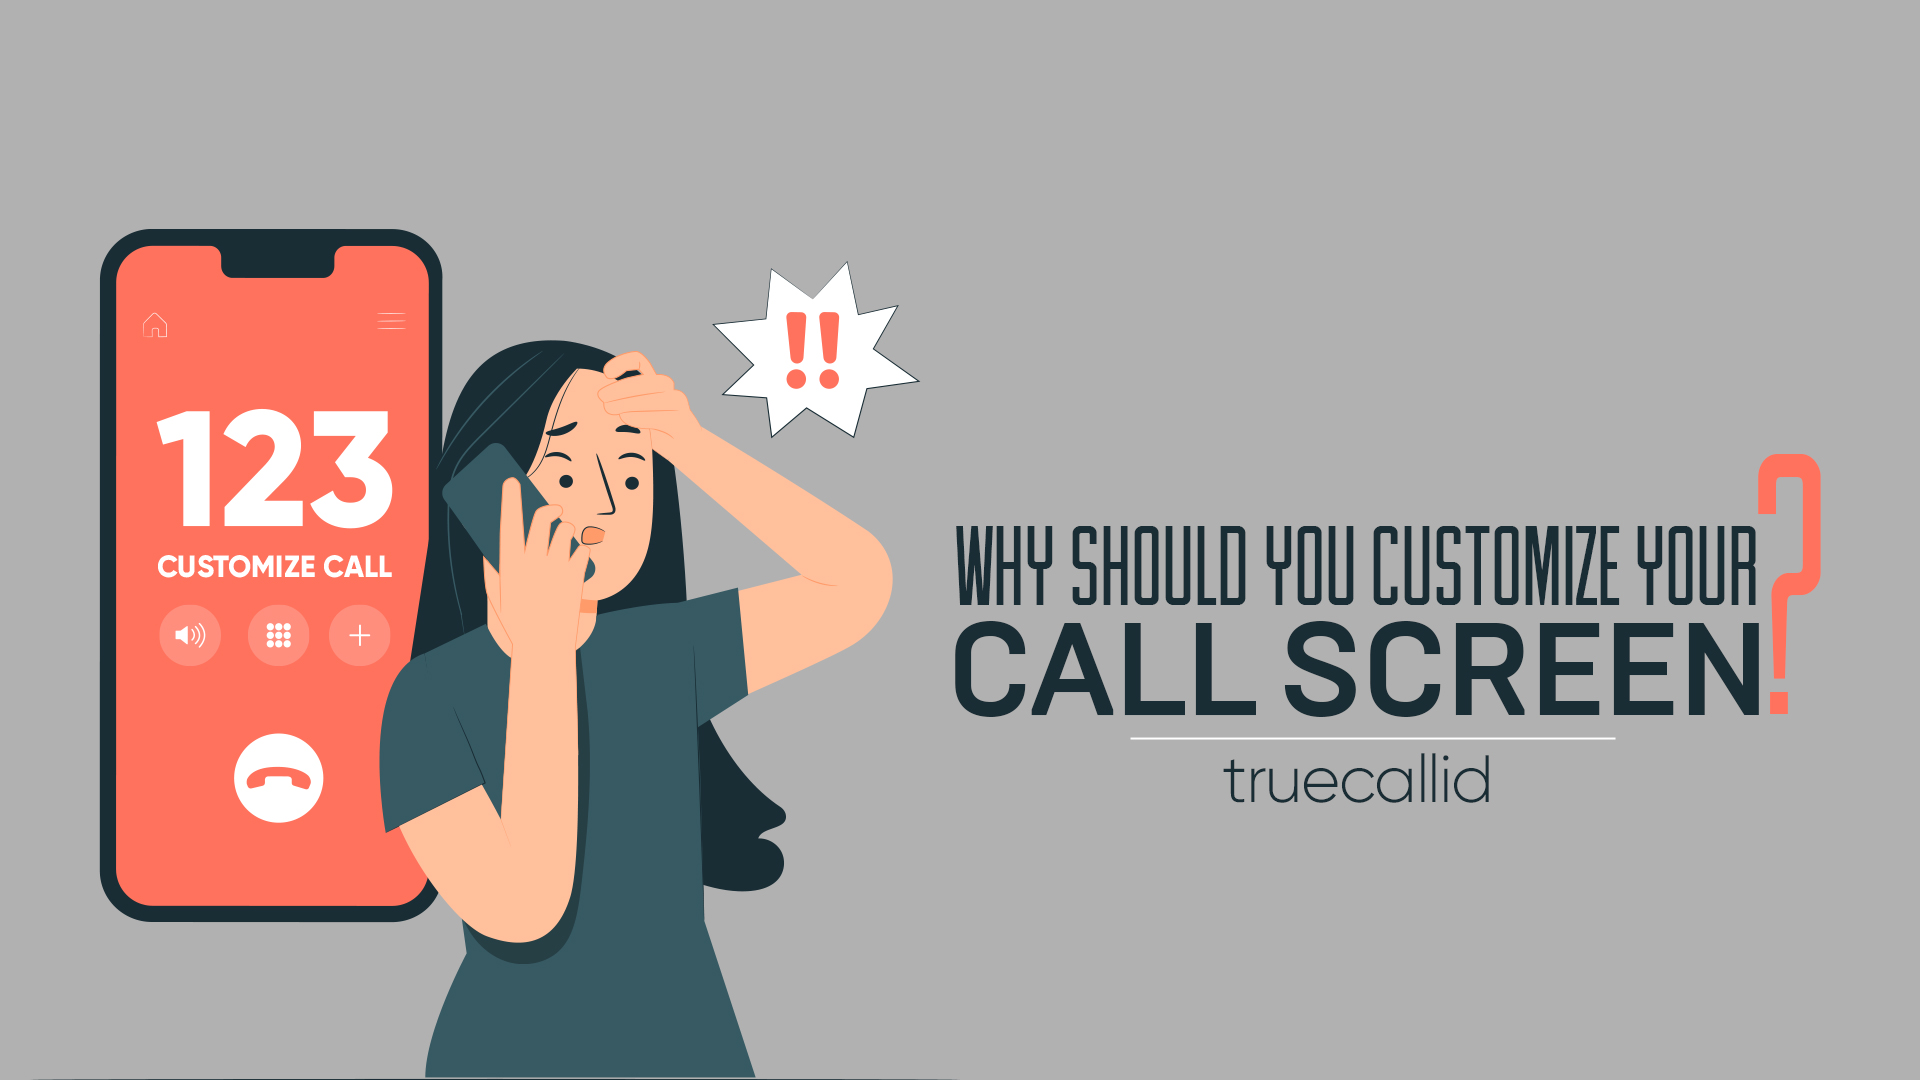 WHY SHOULD YOU CUSTOMIZE YOUR CALL SCREEN?